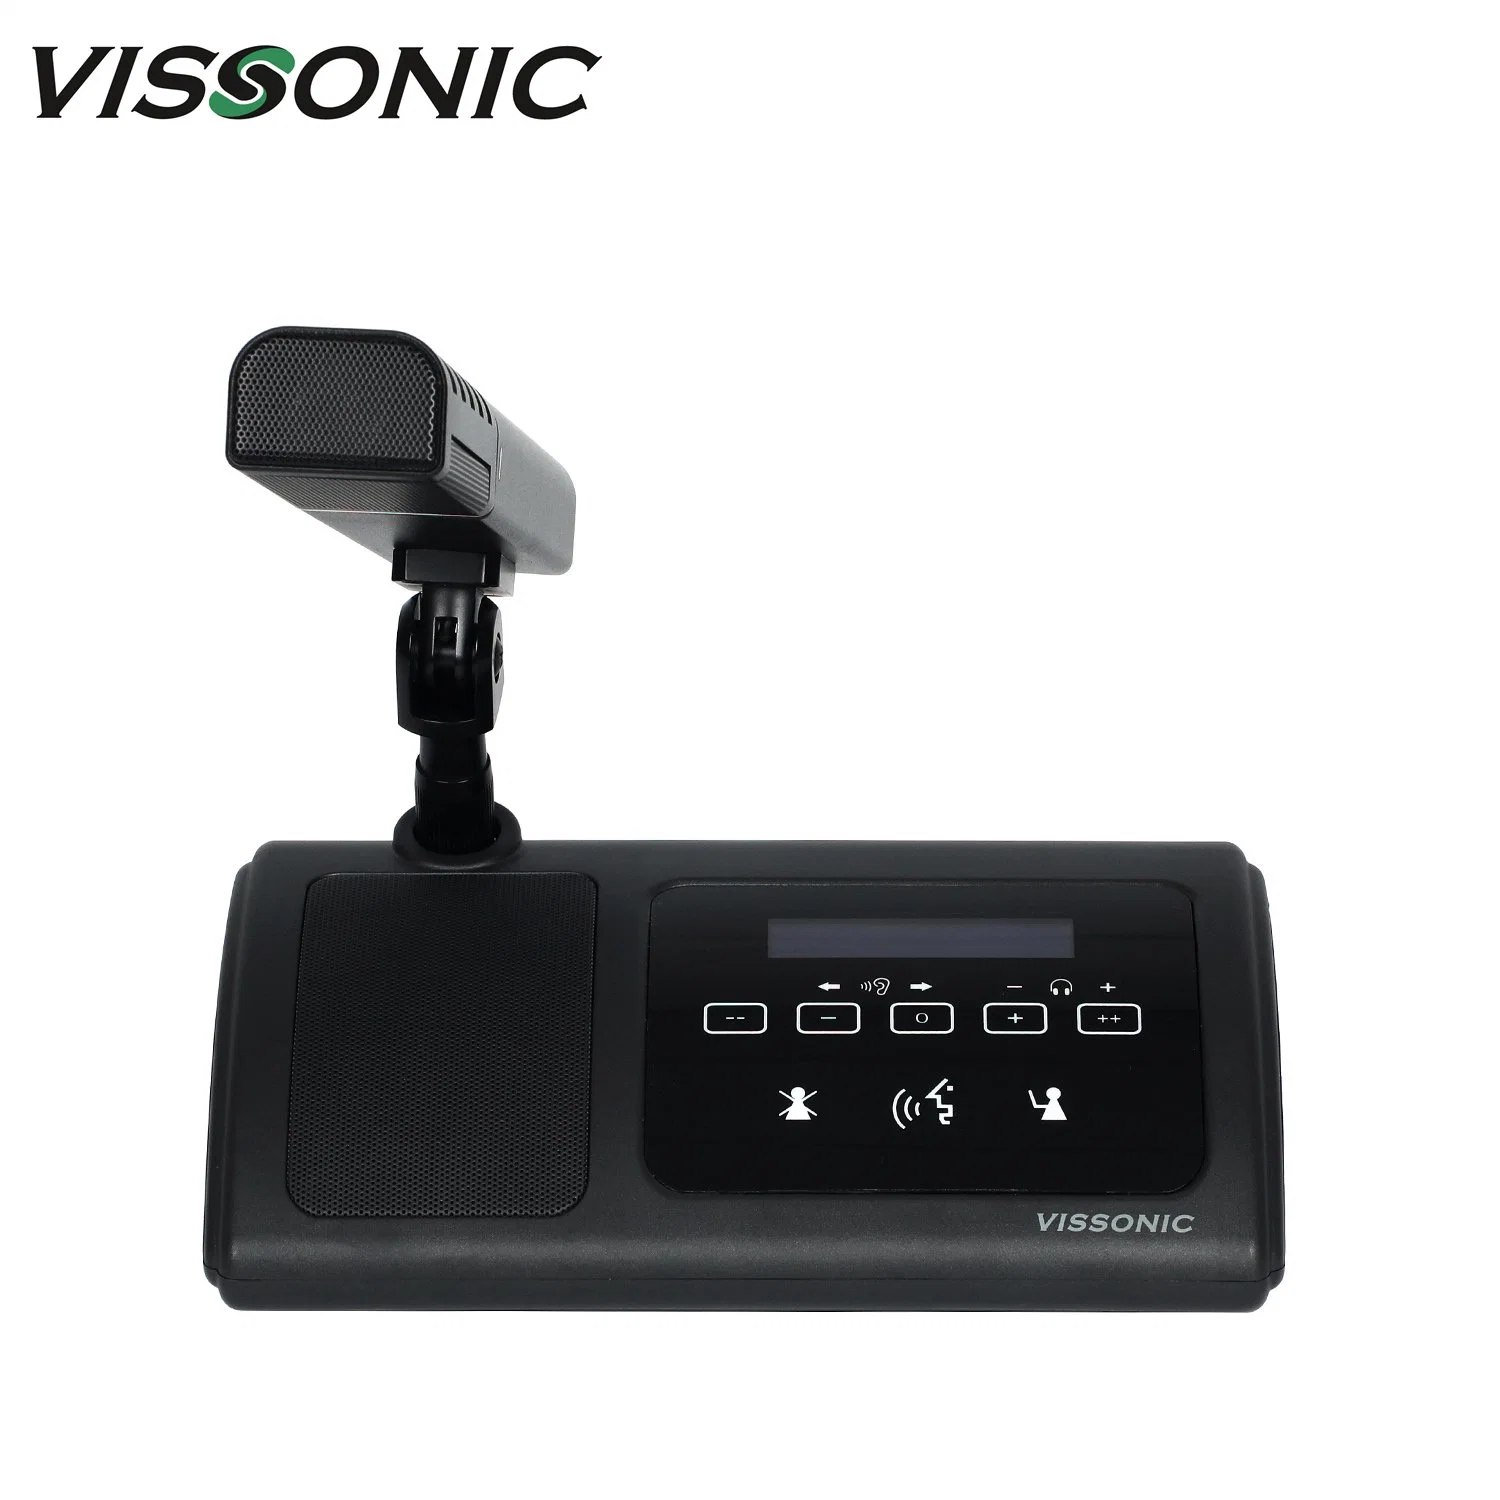 Vissonic OLED 5g WiFi Wireless Digital Discussion Voting Chairman Delegate Pluggable Microphone with Touchable Interface